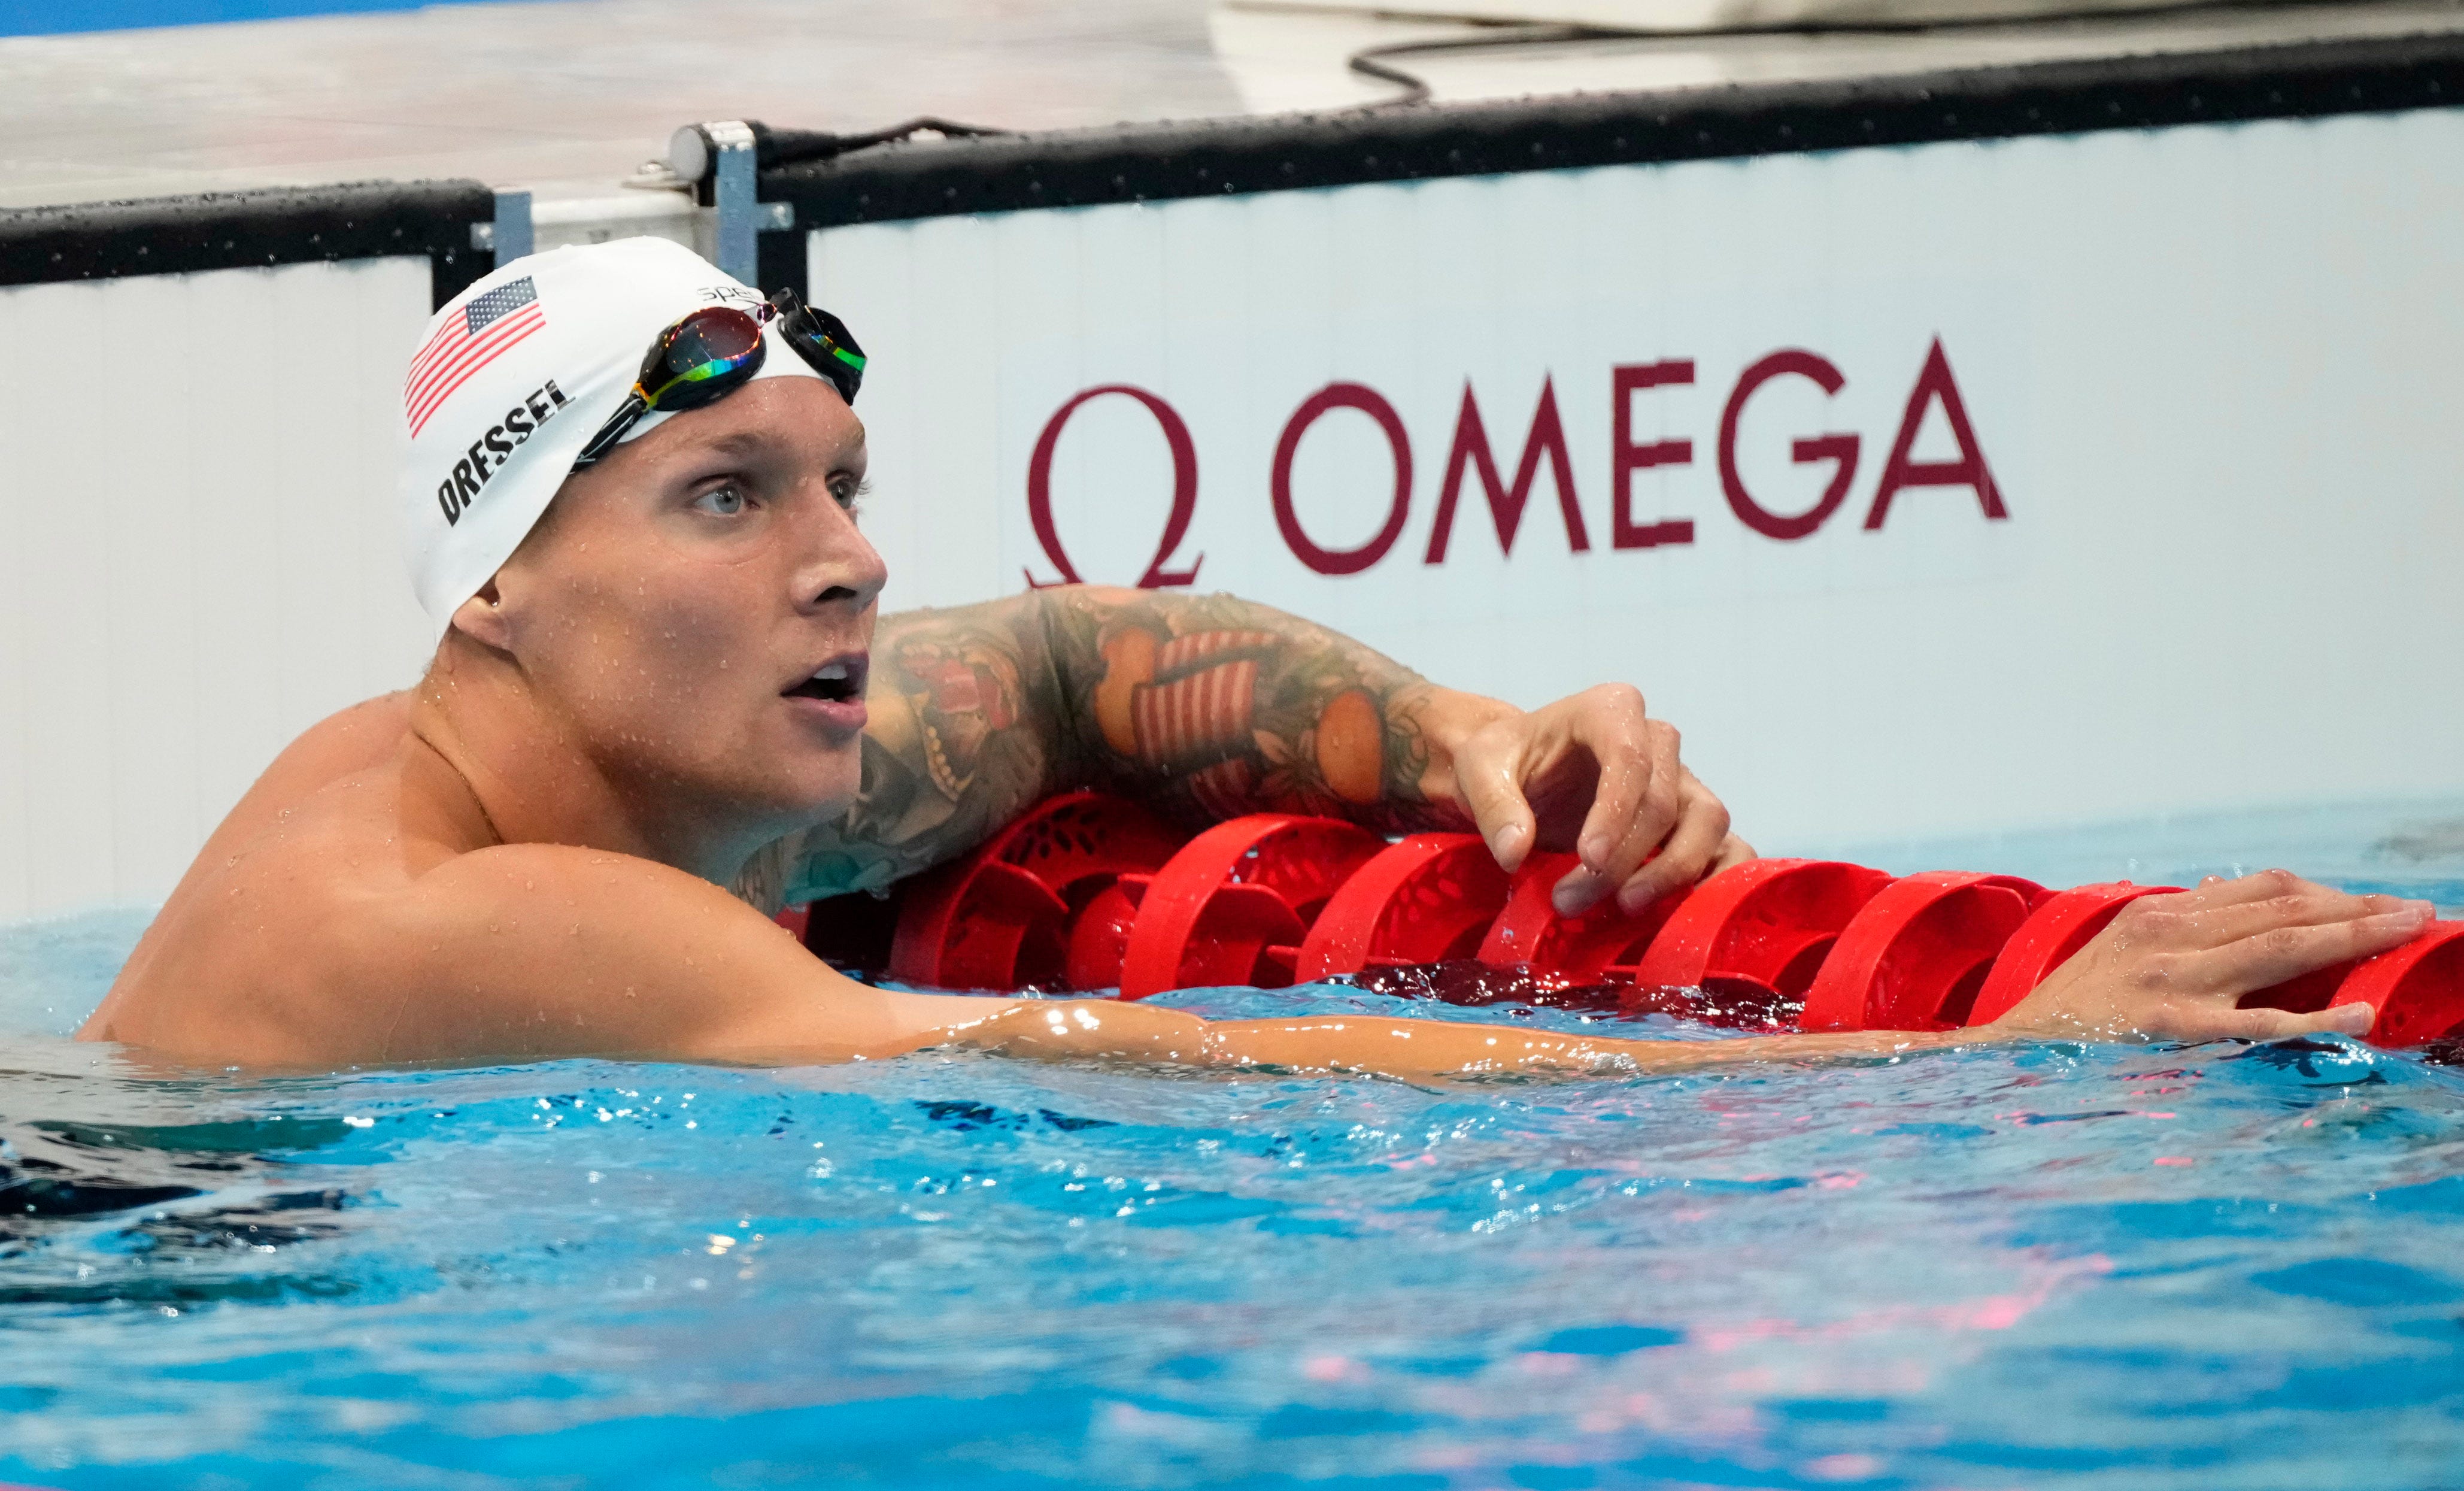 Caeleb Dressel (USA) after the men's 100m freestyle heats during the Tokyo 2020 Olympic Summer Games at Tokyo Aquatics Centre on July 27, 2021.